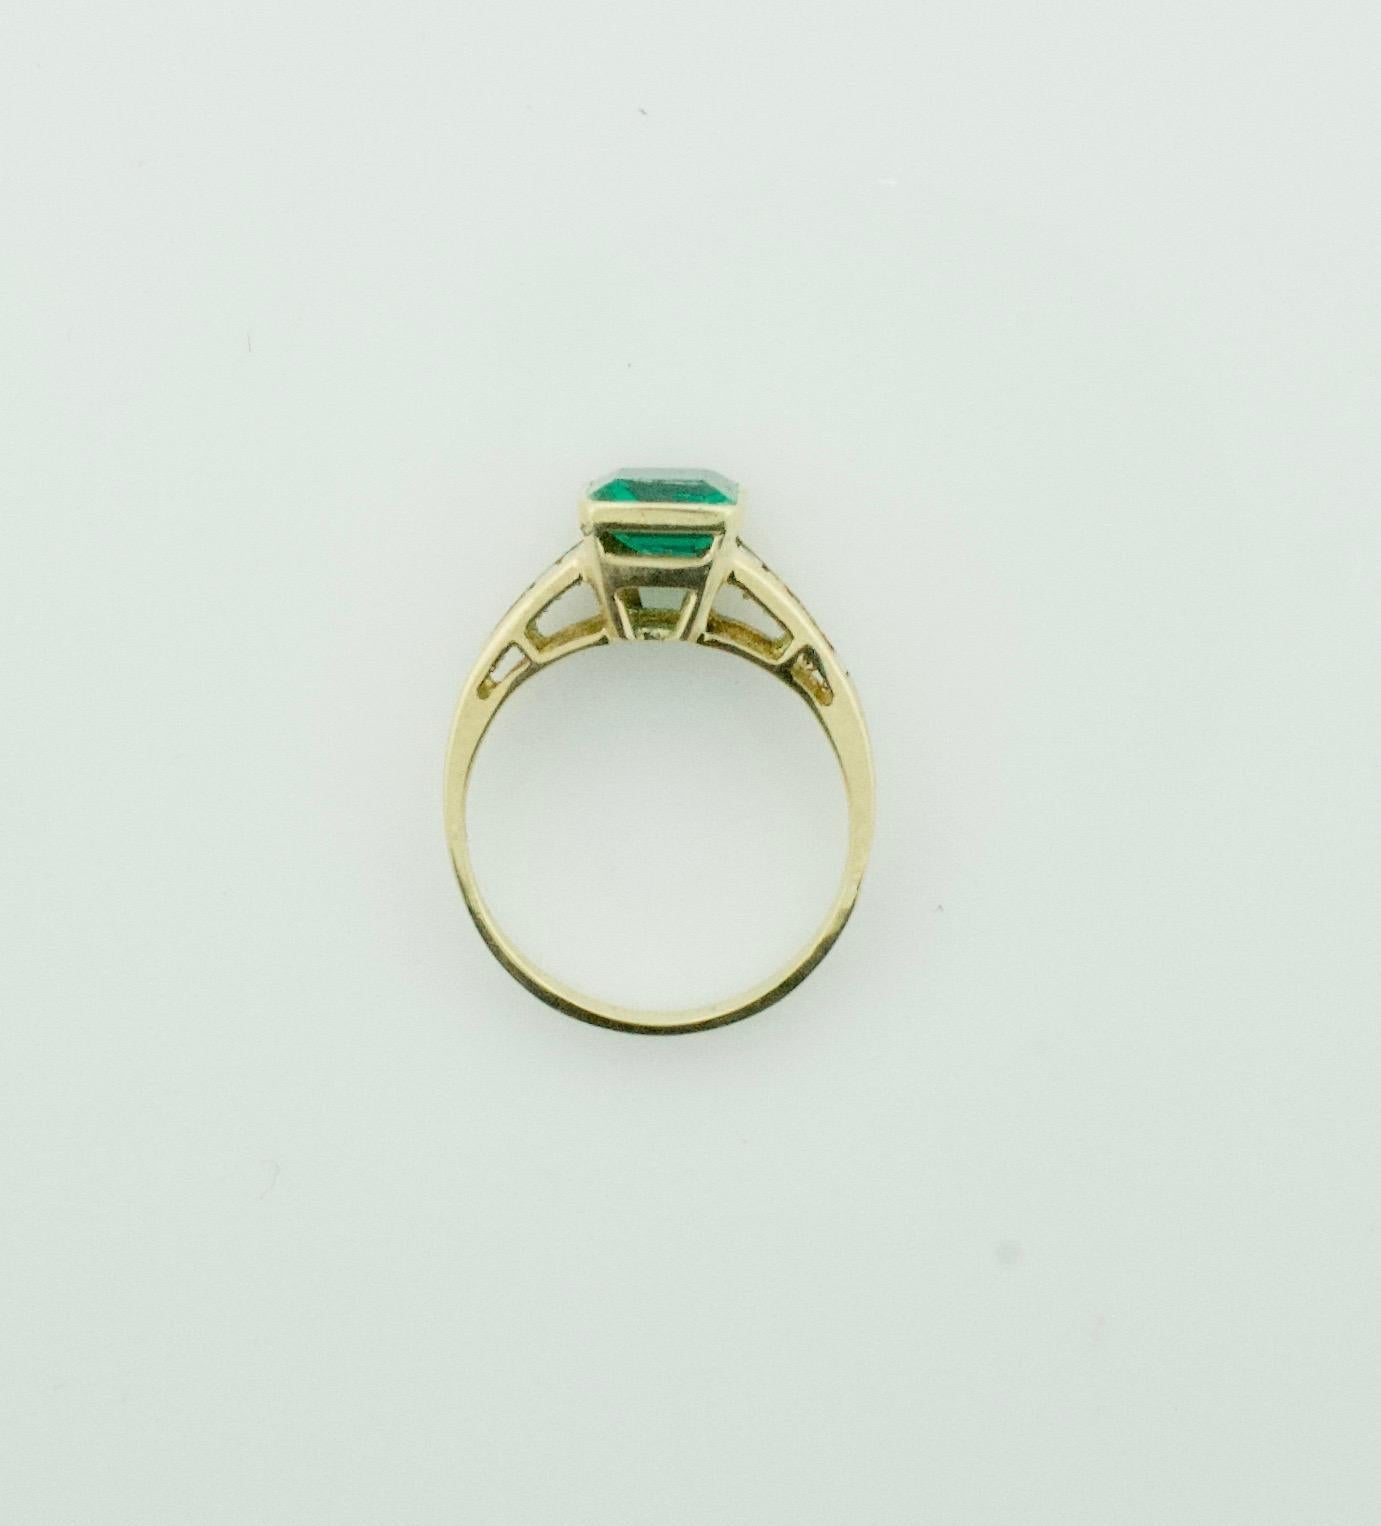 Emerald and Diamond Solitaire Ring in 18k Yellow Gold
One emerald Cut Emerald Weighing 1.24 Carats  [bright with no imperfections visible to the naked eye]
Ten Baguette Cut Diamonds Weighing .53 Carats Approximately
Set In 18k Yellow Gold
Purchased